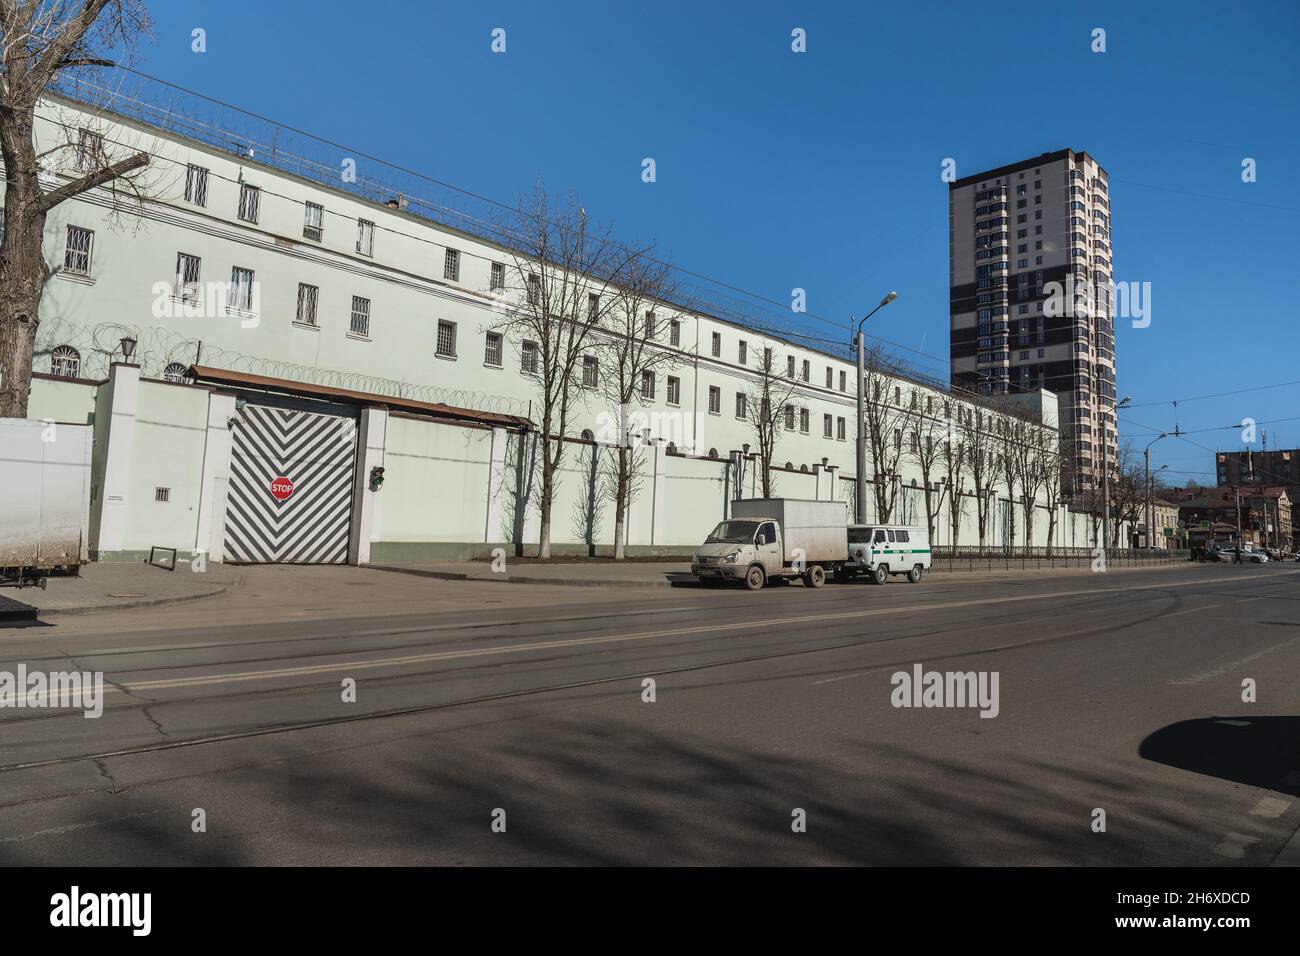 Rostov-on-Don, Russia - March 12, 2021: Building of Remand prison Stock Photo